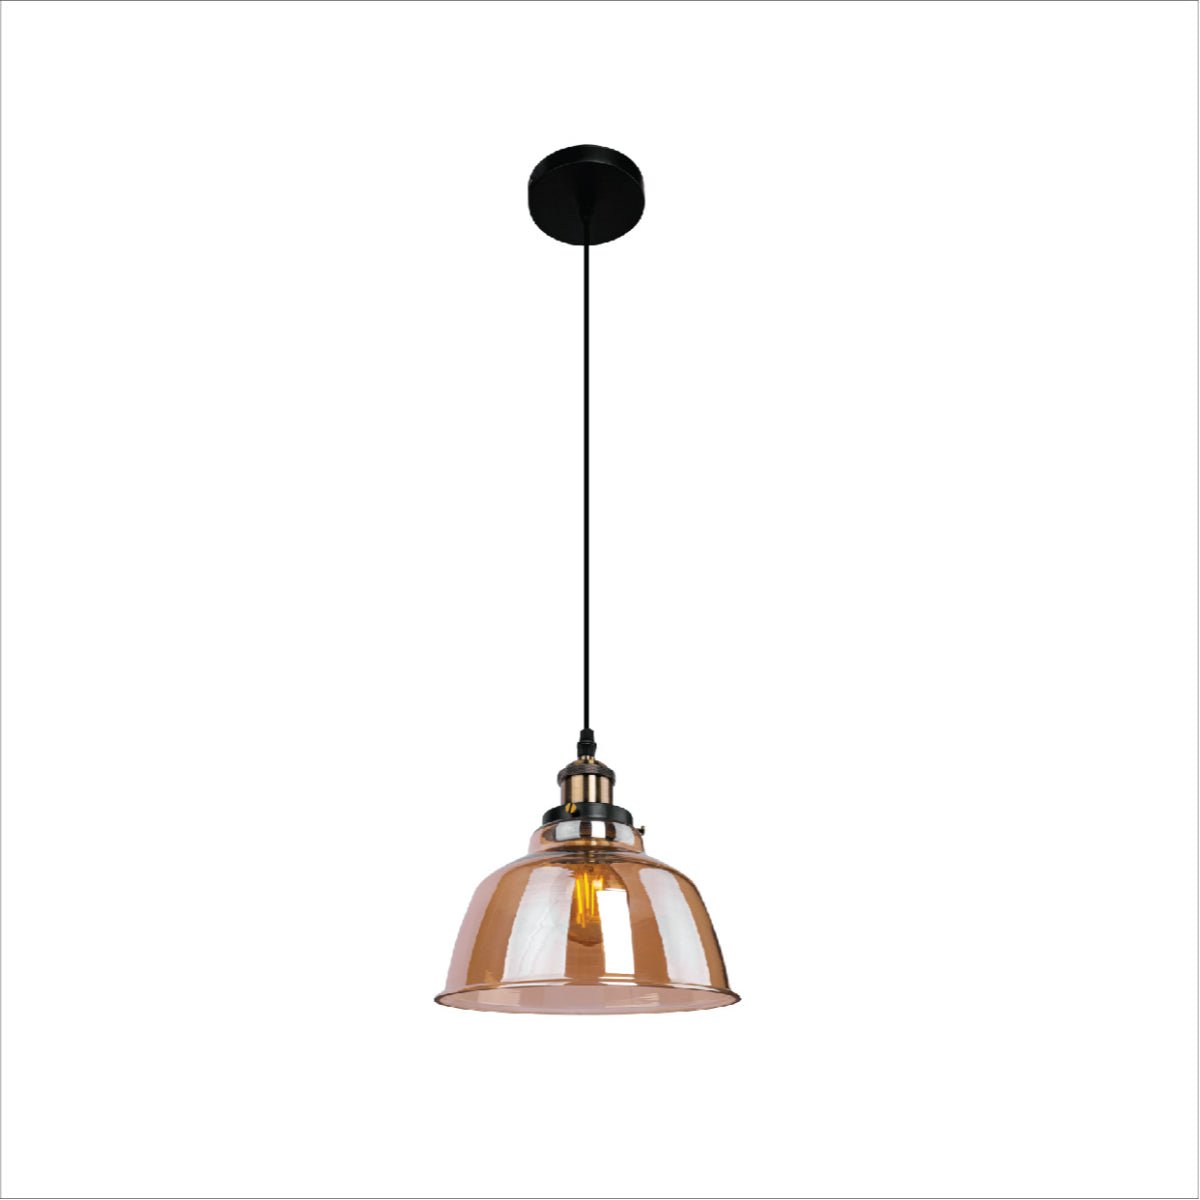 Main image of Amber Glass Dome Pendant Ceiling Light with E27 | TEKLED 150-17804